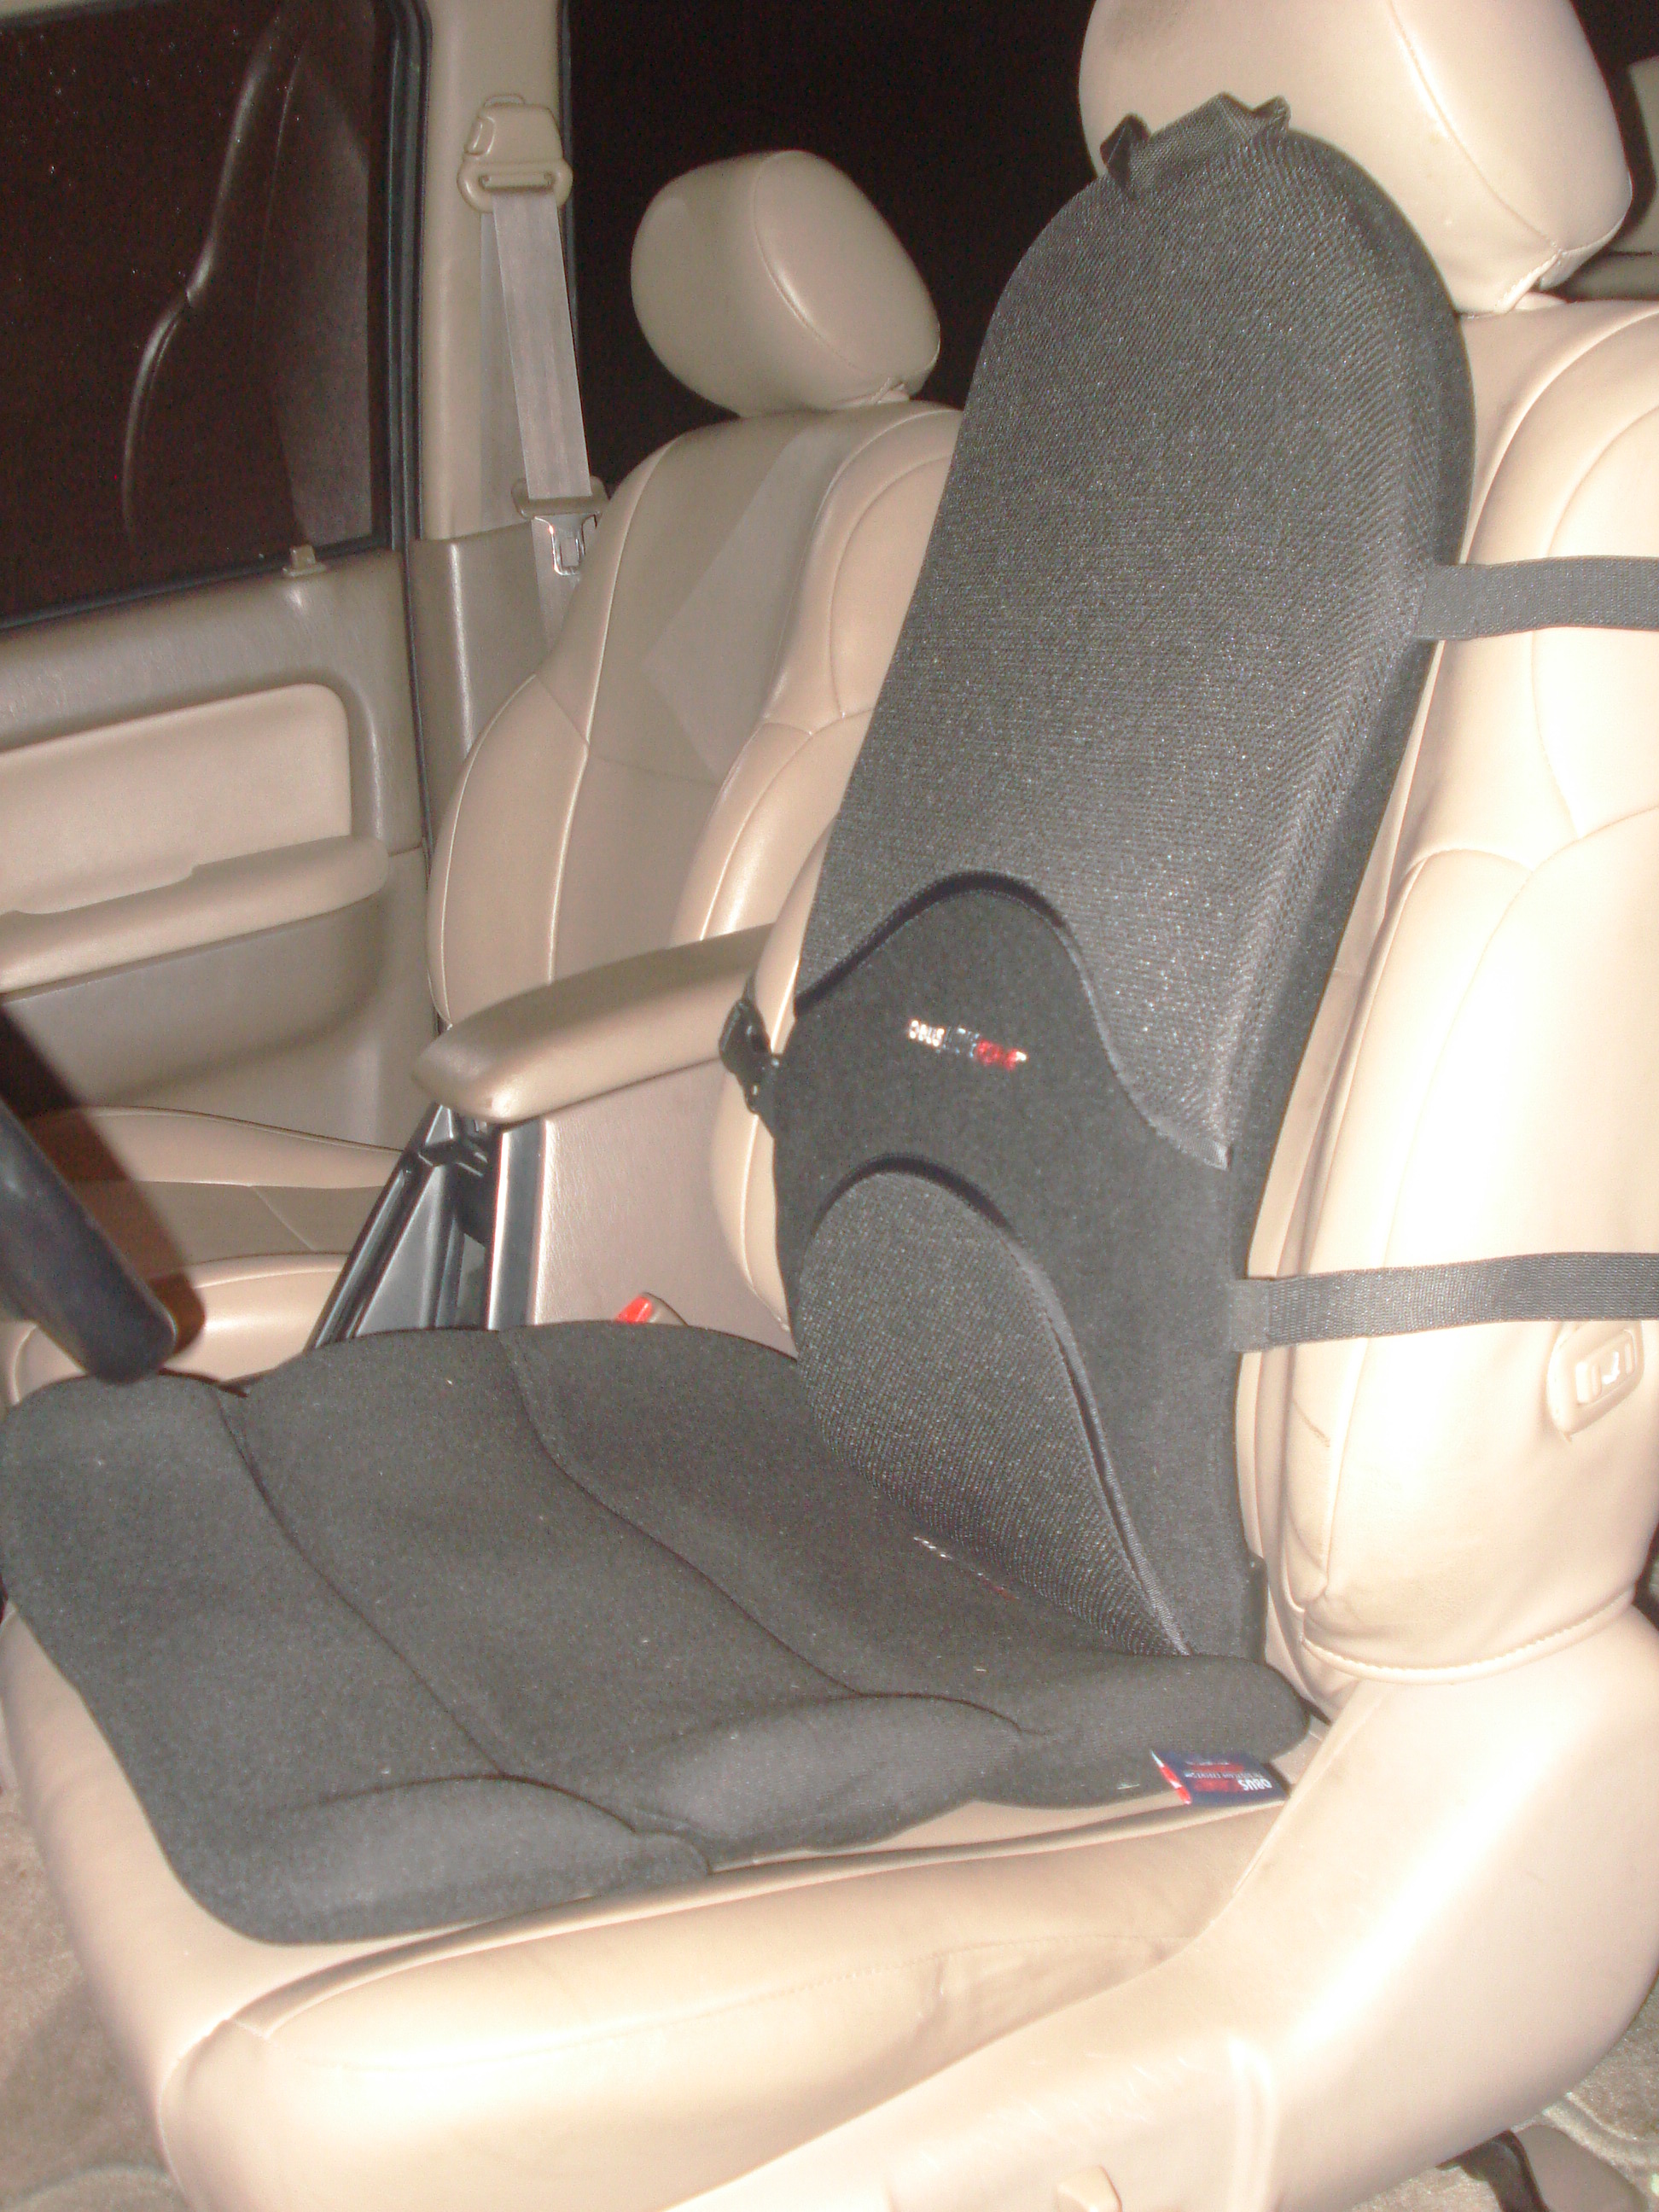 https://www.crossfireforum.org/forum/attachments/parts-accessories-sale-archive/16545d1256273545-obusforme-seat-cushion-back-support-cure-uncomfortable-xfire-seats-002.jpg